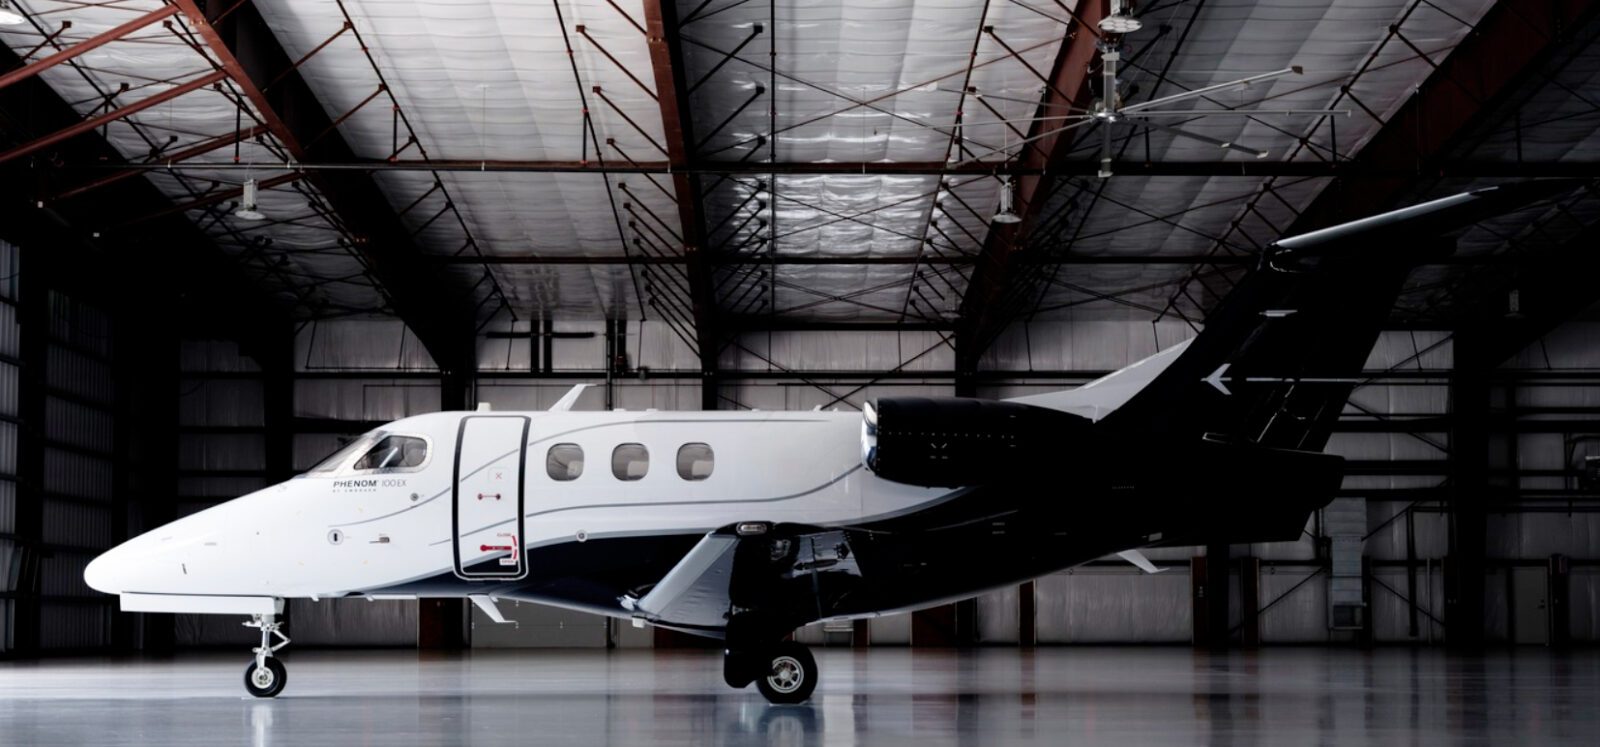 Embraer reimagines excellence with the all-new Phenom 100EX